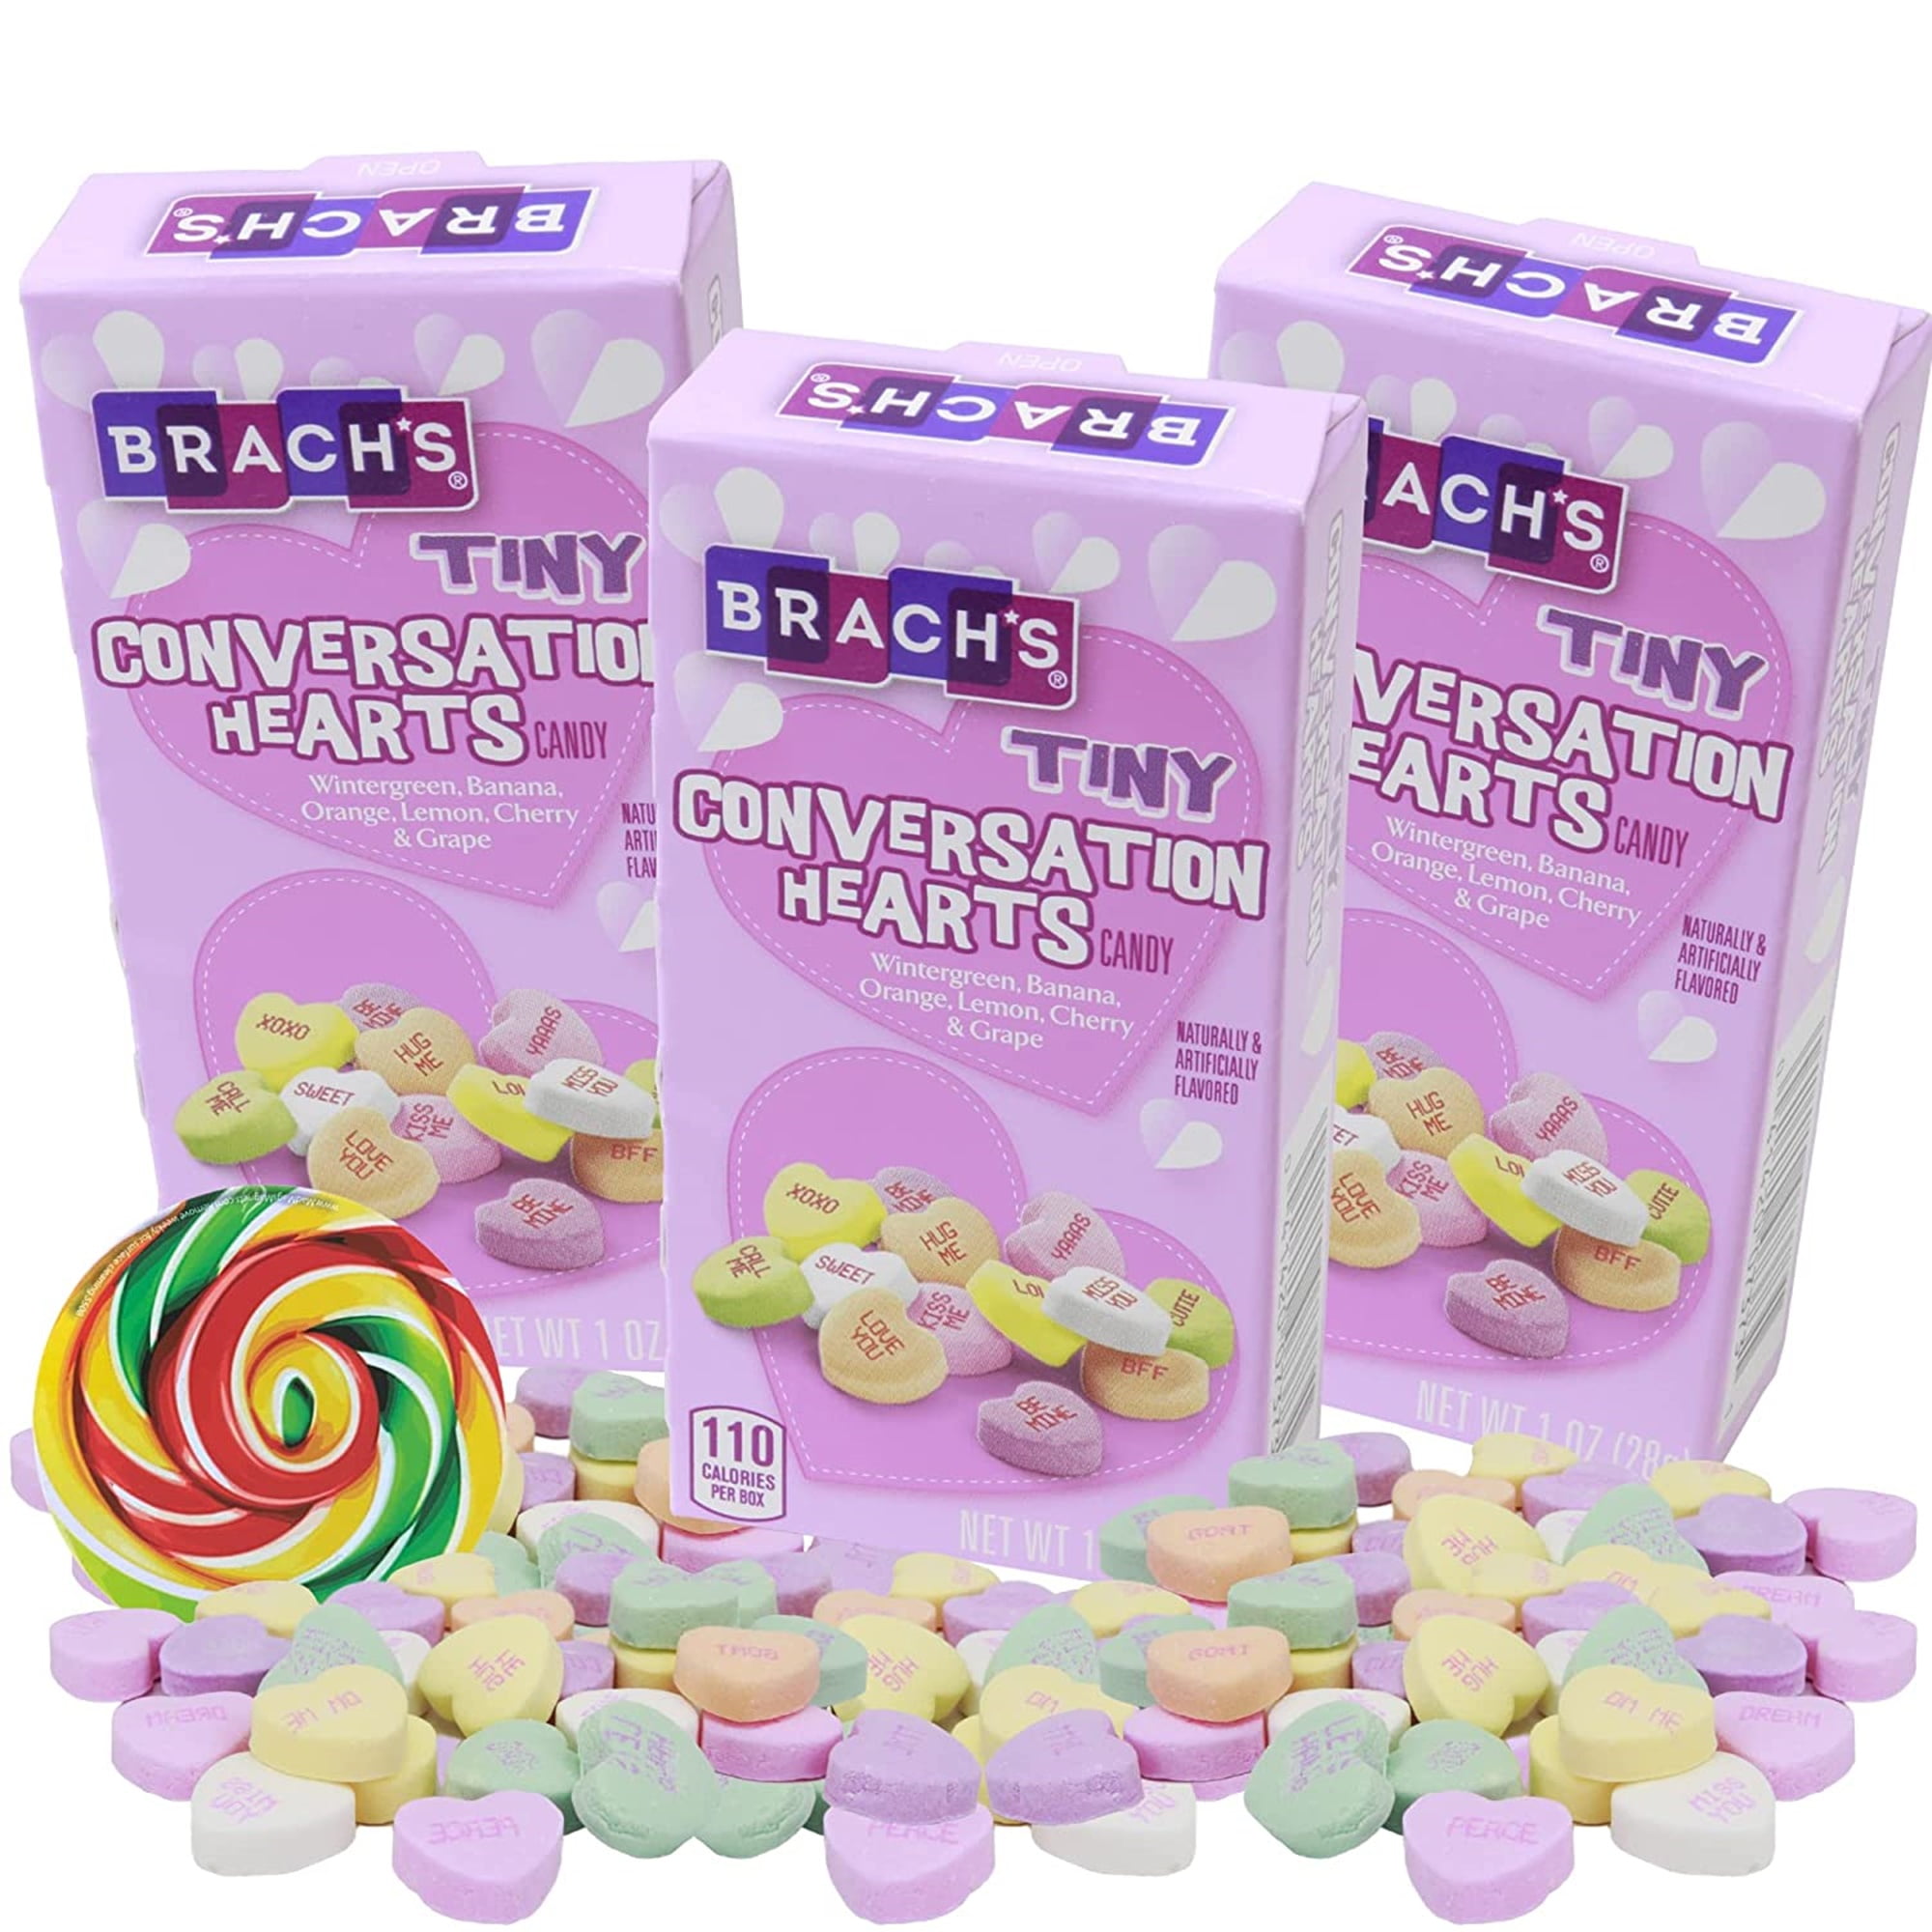 Brach’s Tiny Candy Conversation Hearts Individual Box Set with To/From,  Valentines Party Favors or Classroom Snacks, 3 Pack, 1 Ounce